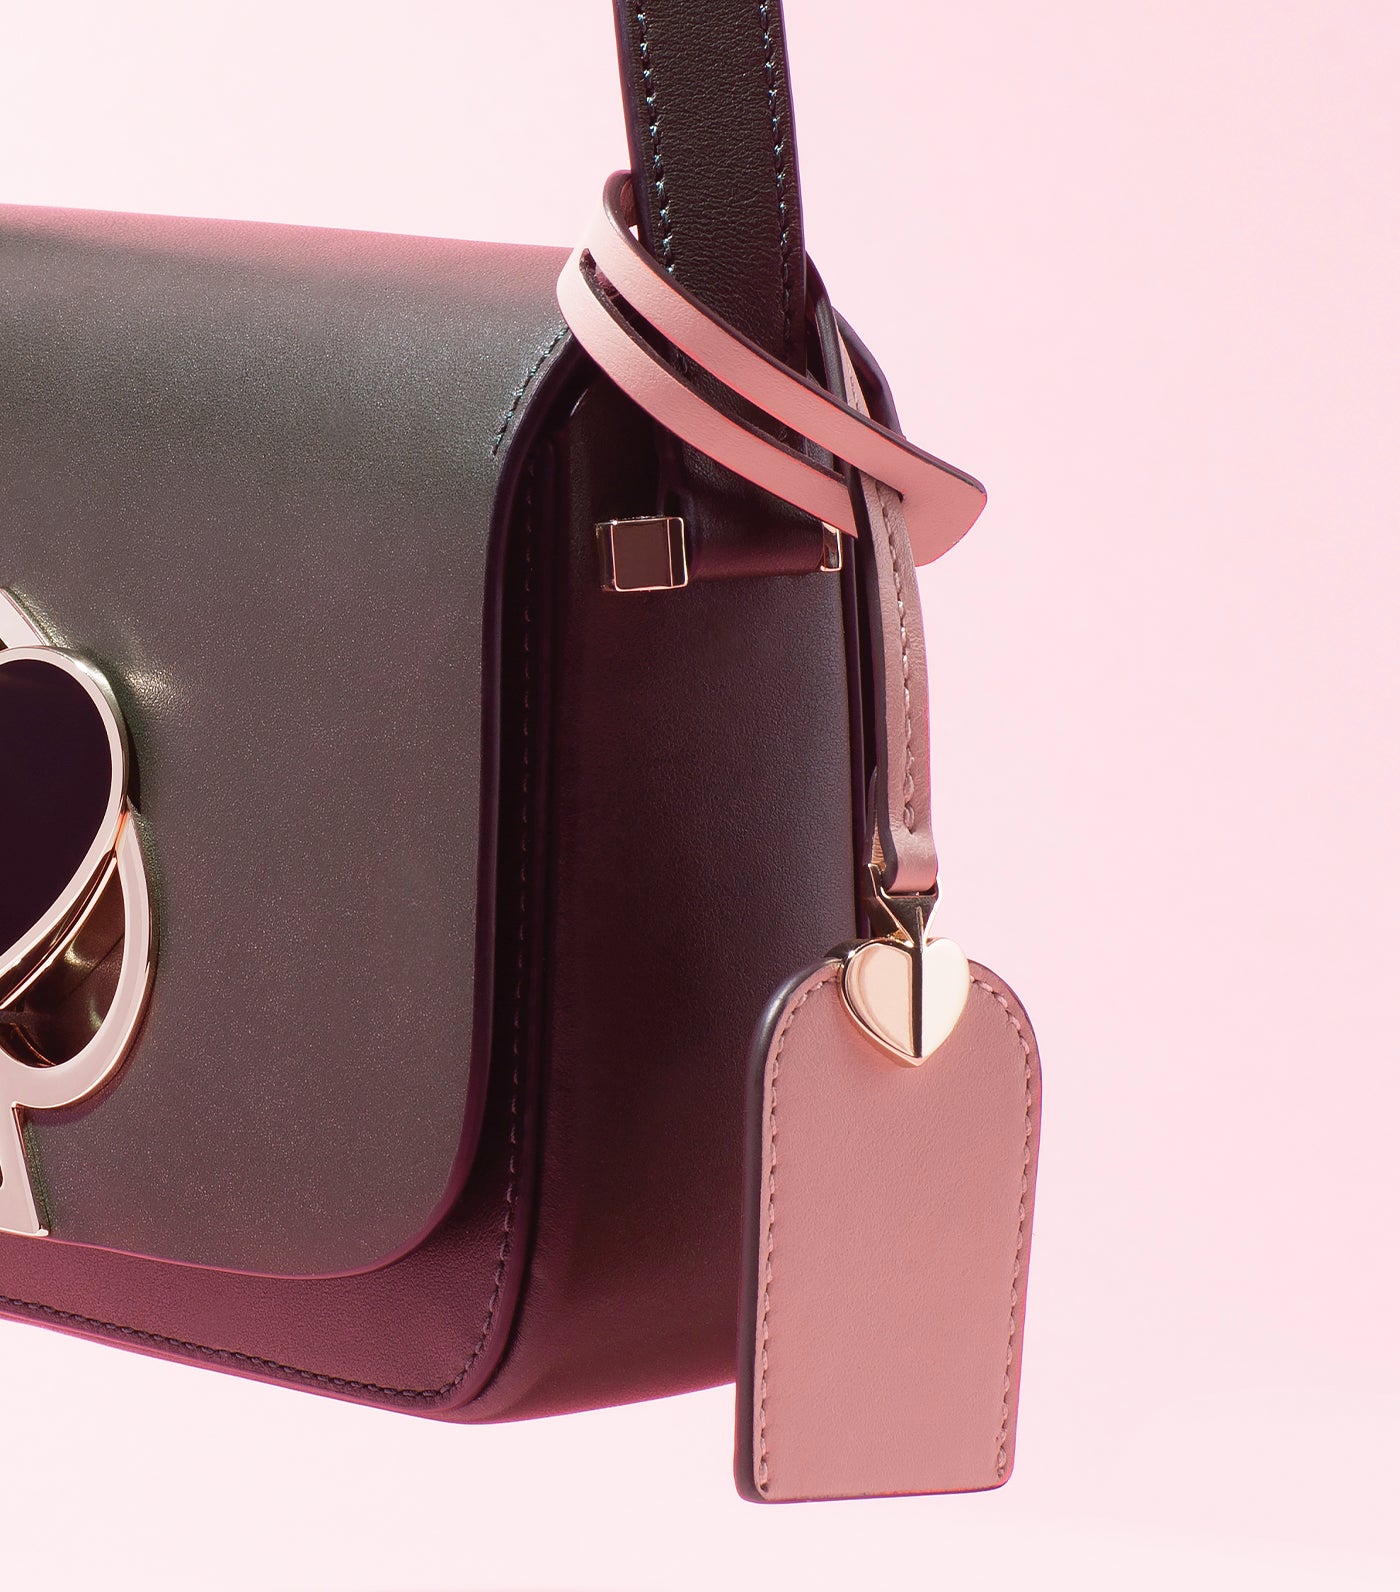 Free Limited-Edition "Be the Love" Leather Bag Tag